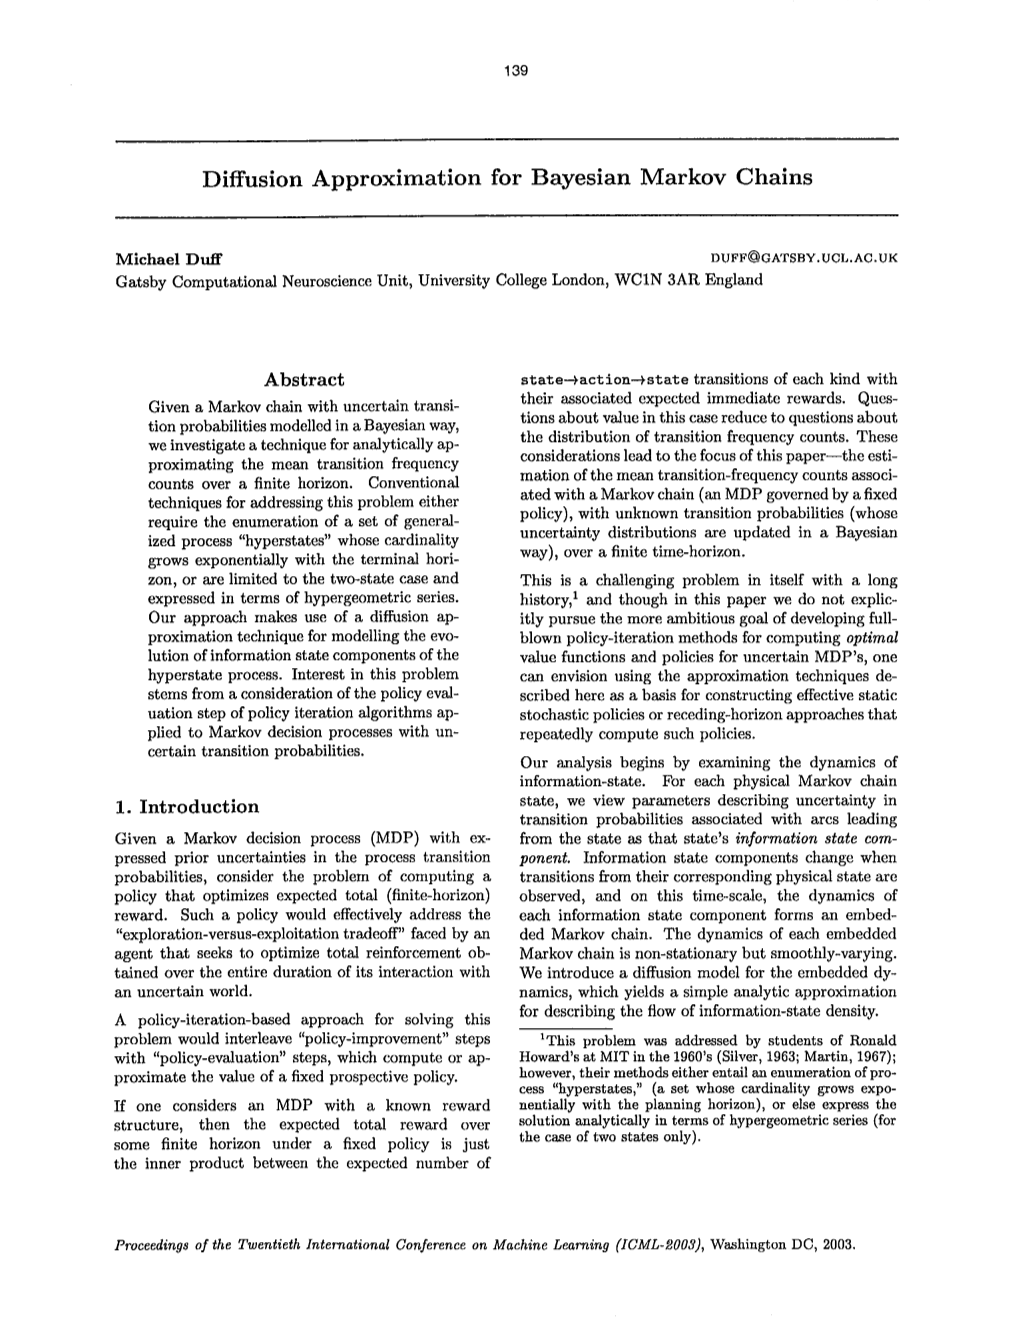 Diffusion Approximation for Bayesian Markov Chains